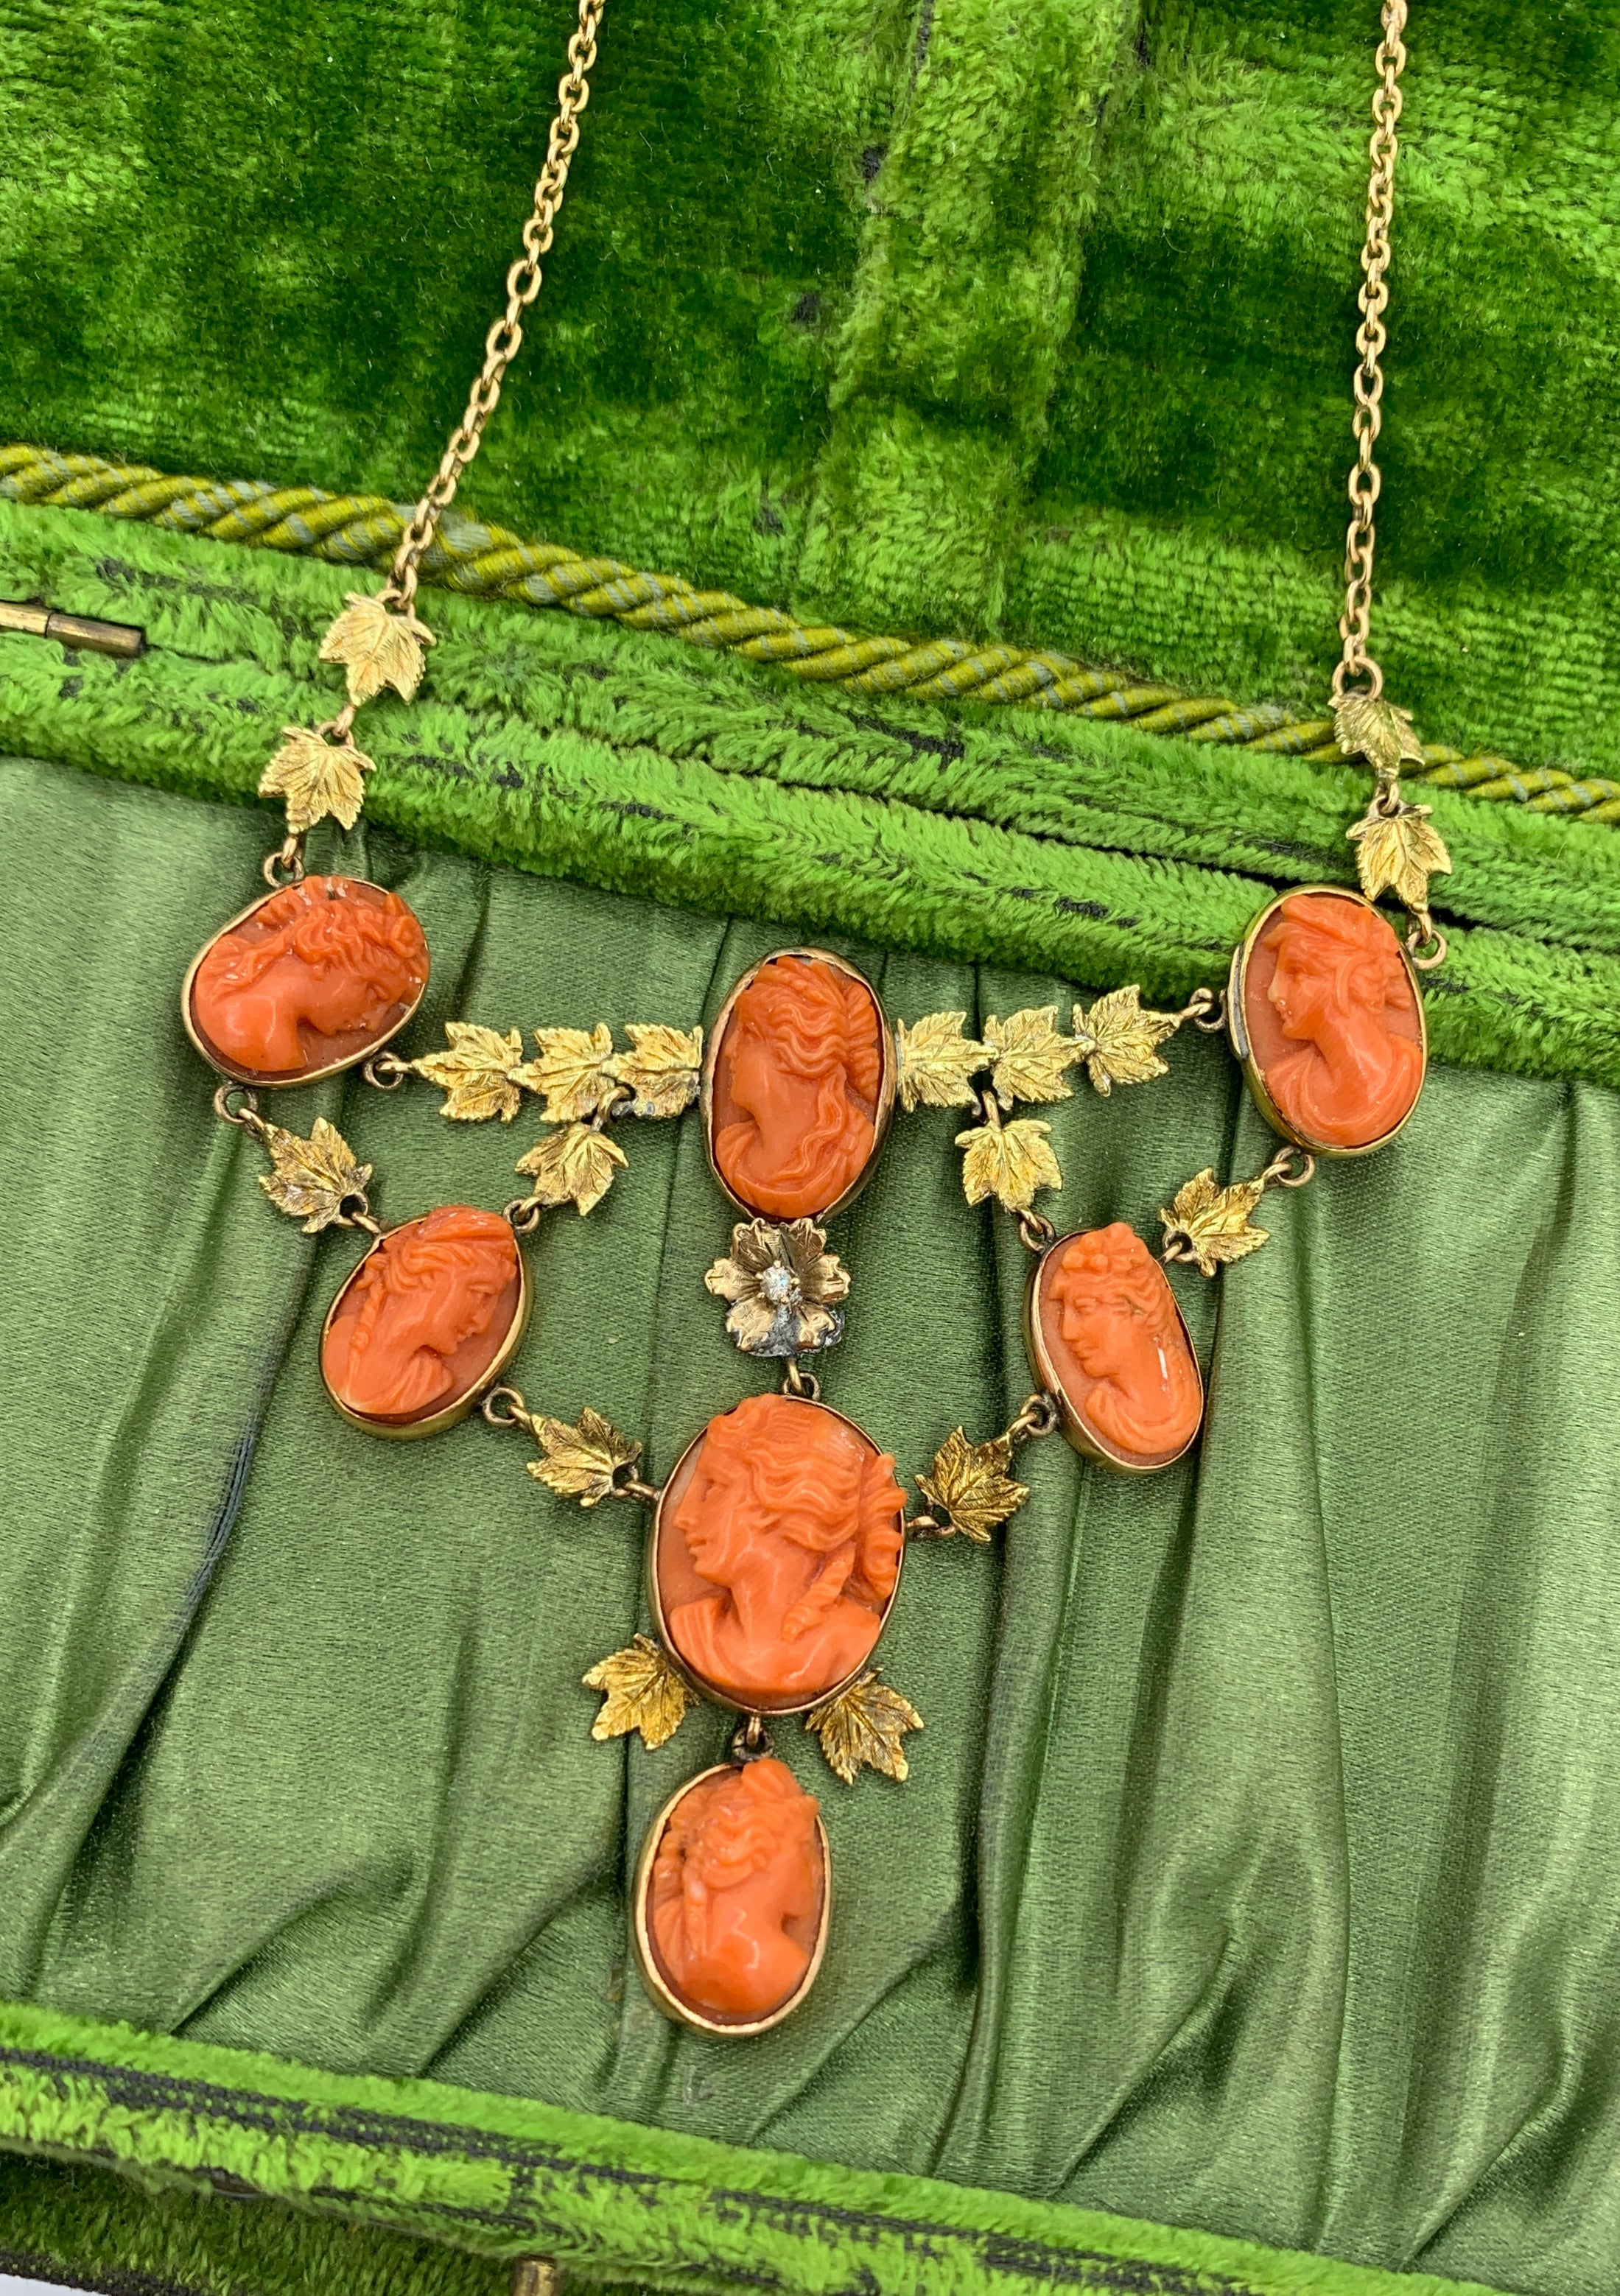 This is an absolutely stunning early antique Coral Cameo Pendant Necklace in 14 Karat Gold dating to the Victorian period with seven magnificent hand carved Coral Cameos in a leaf motif design with a central flower set with an Old Mine Cut Diamond.